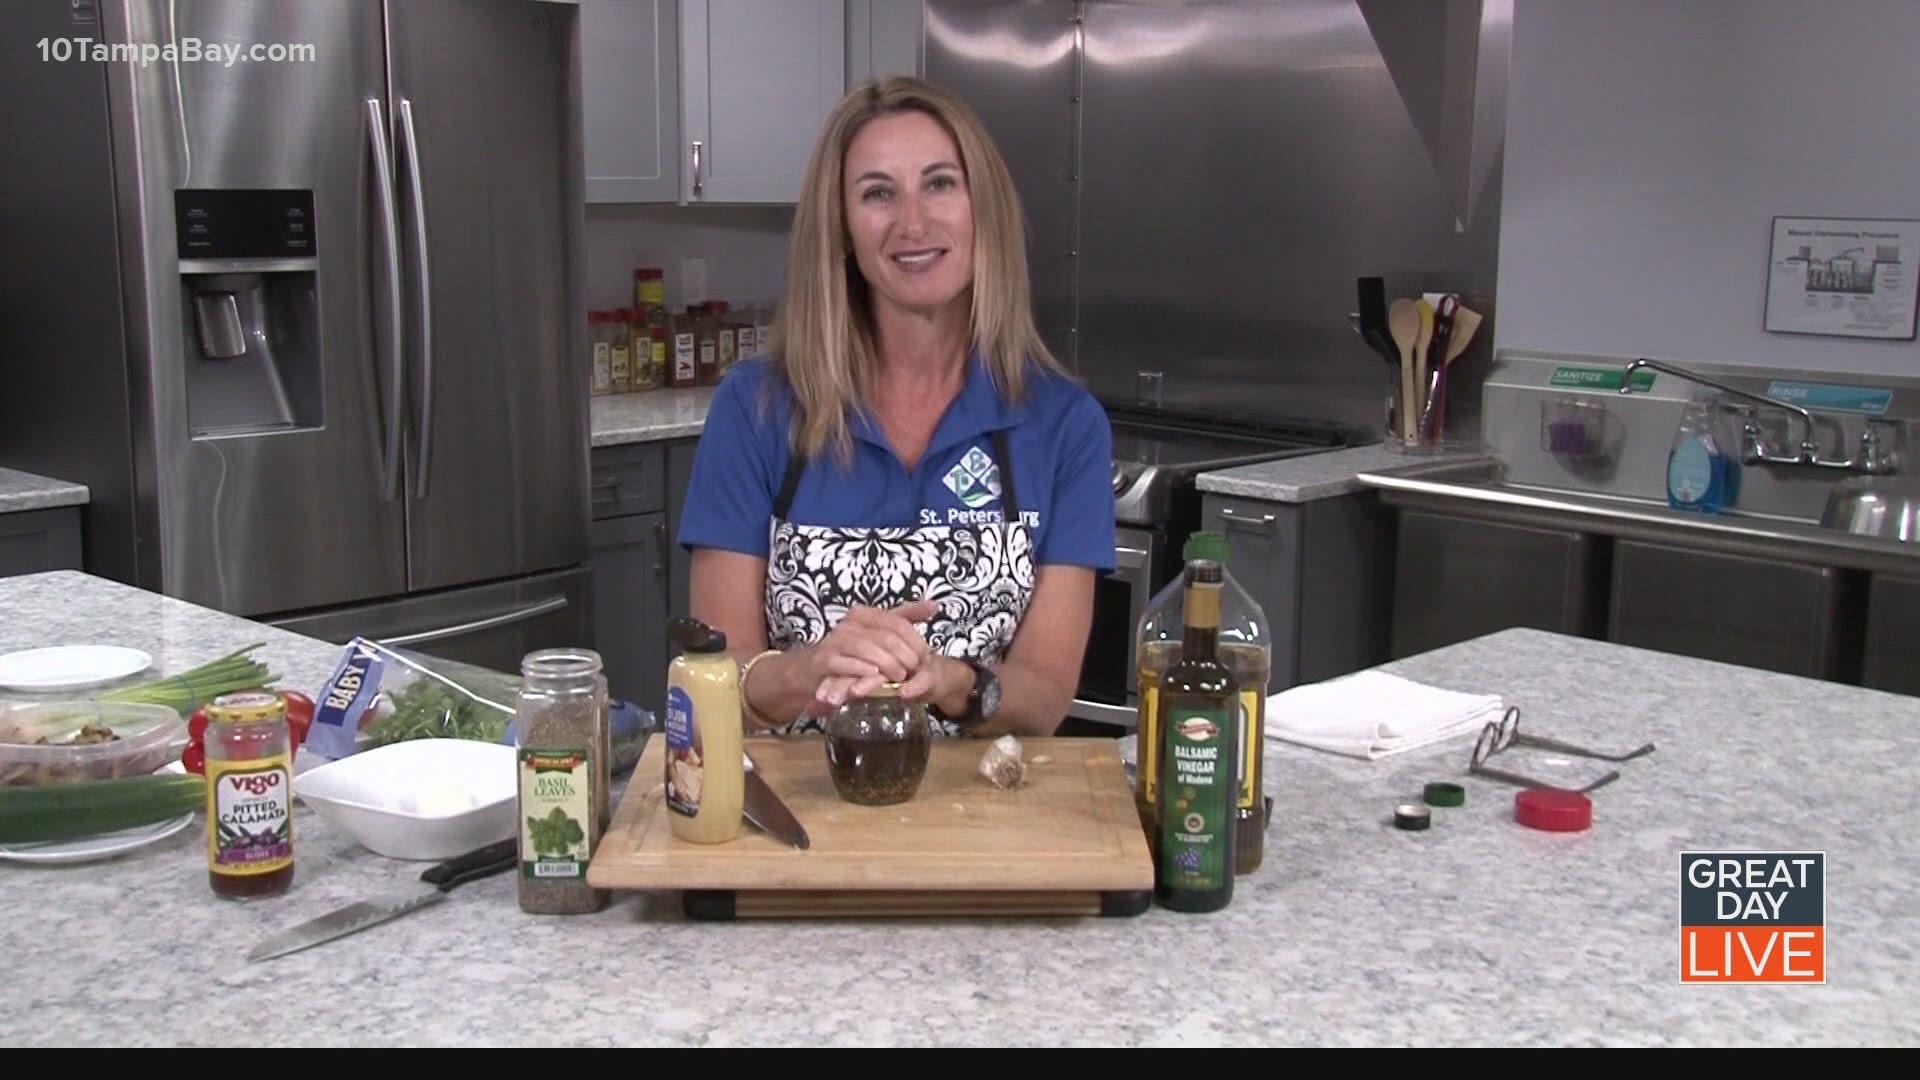 Are you a fan of vinaigrette? Instead of buying one at the store, try making your own! Wendy Wesley from The St. Petersburg Free Clinic has a delicious recipe.